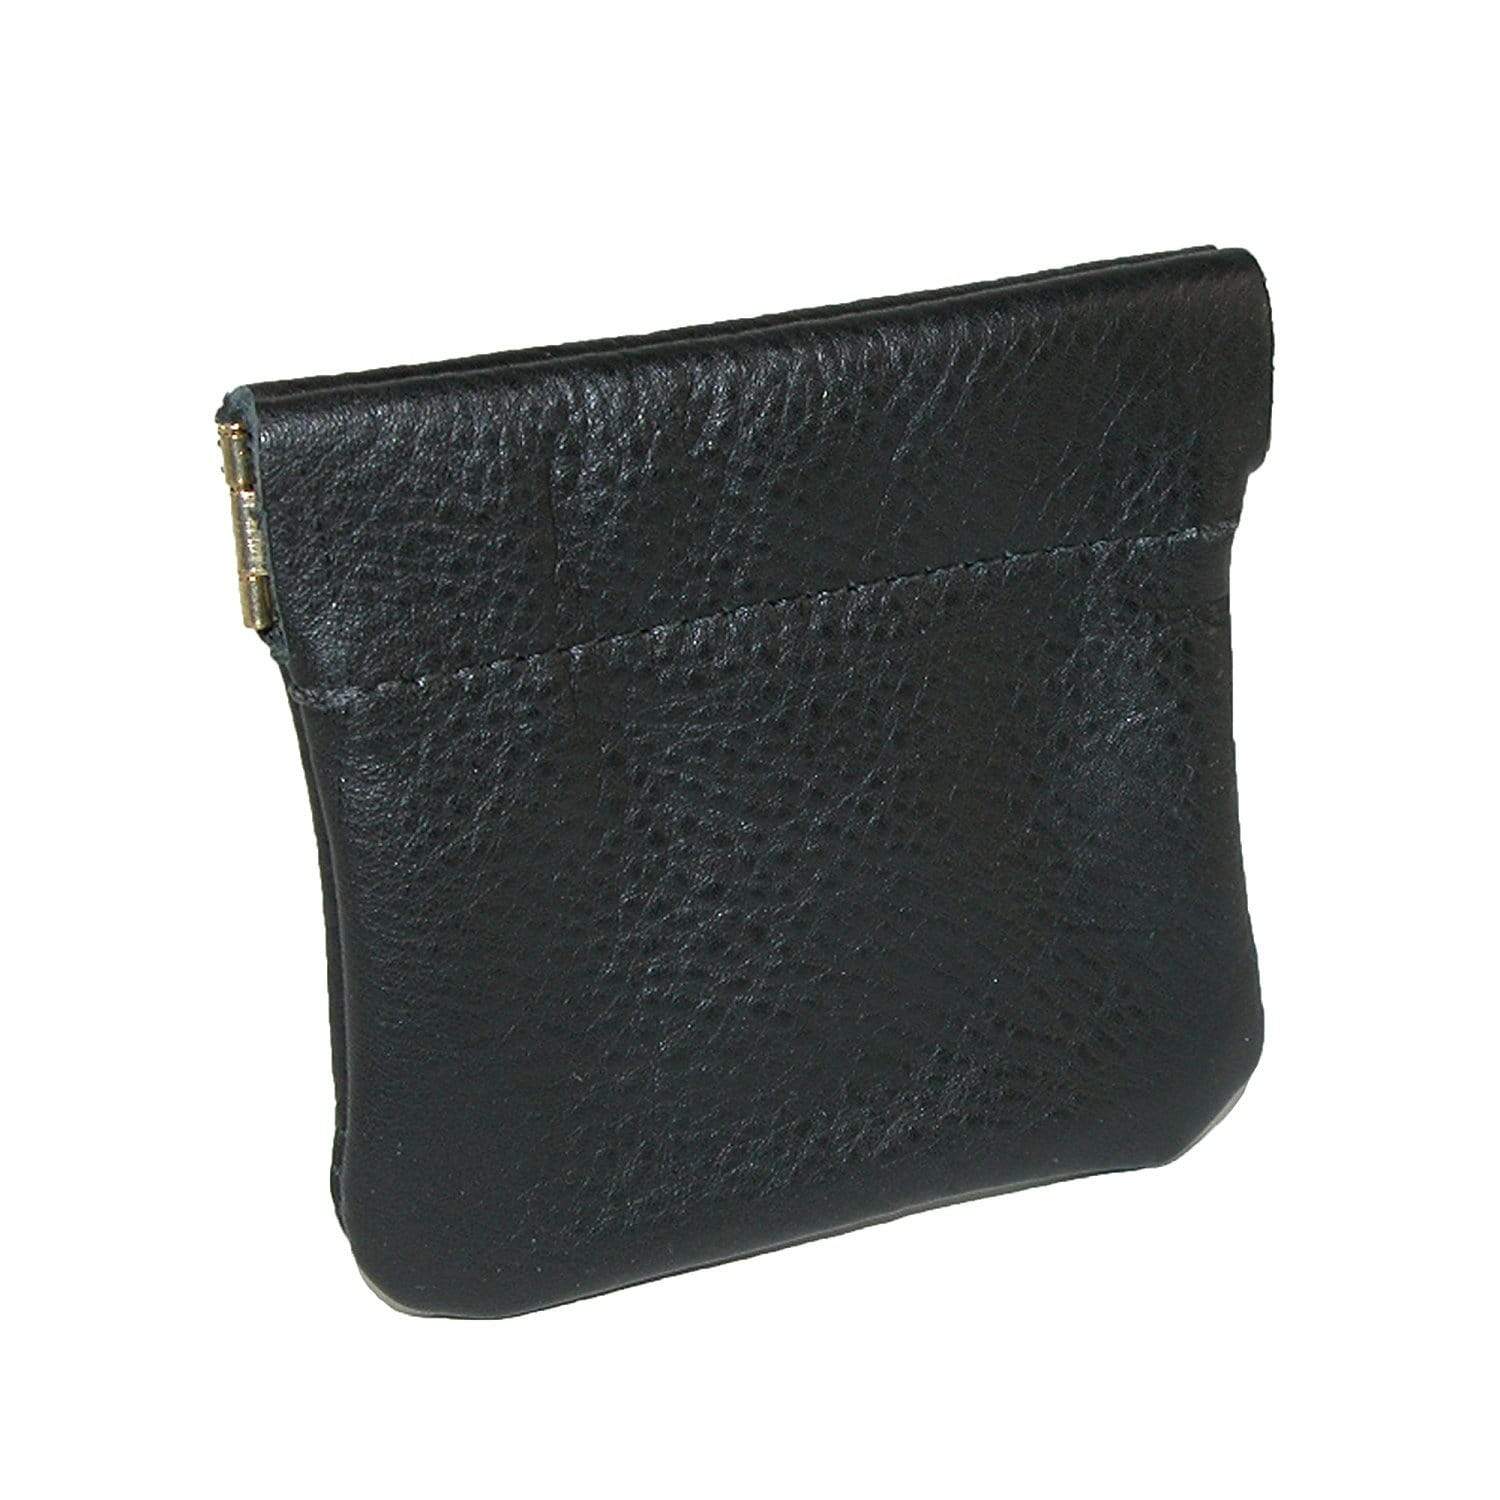 Genuine Leather Coin Pouch Change Holder for Men/Woman with Zipper Pouch  Size 4 x2.5 Made in U.S.A (Black)